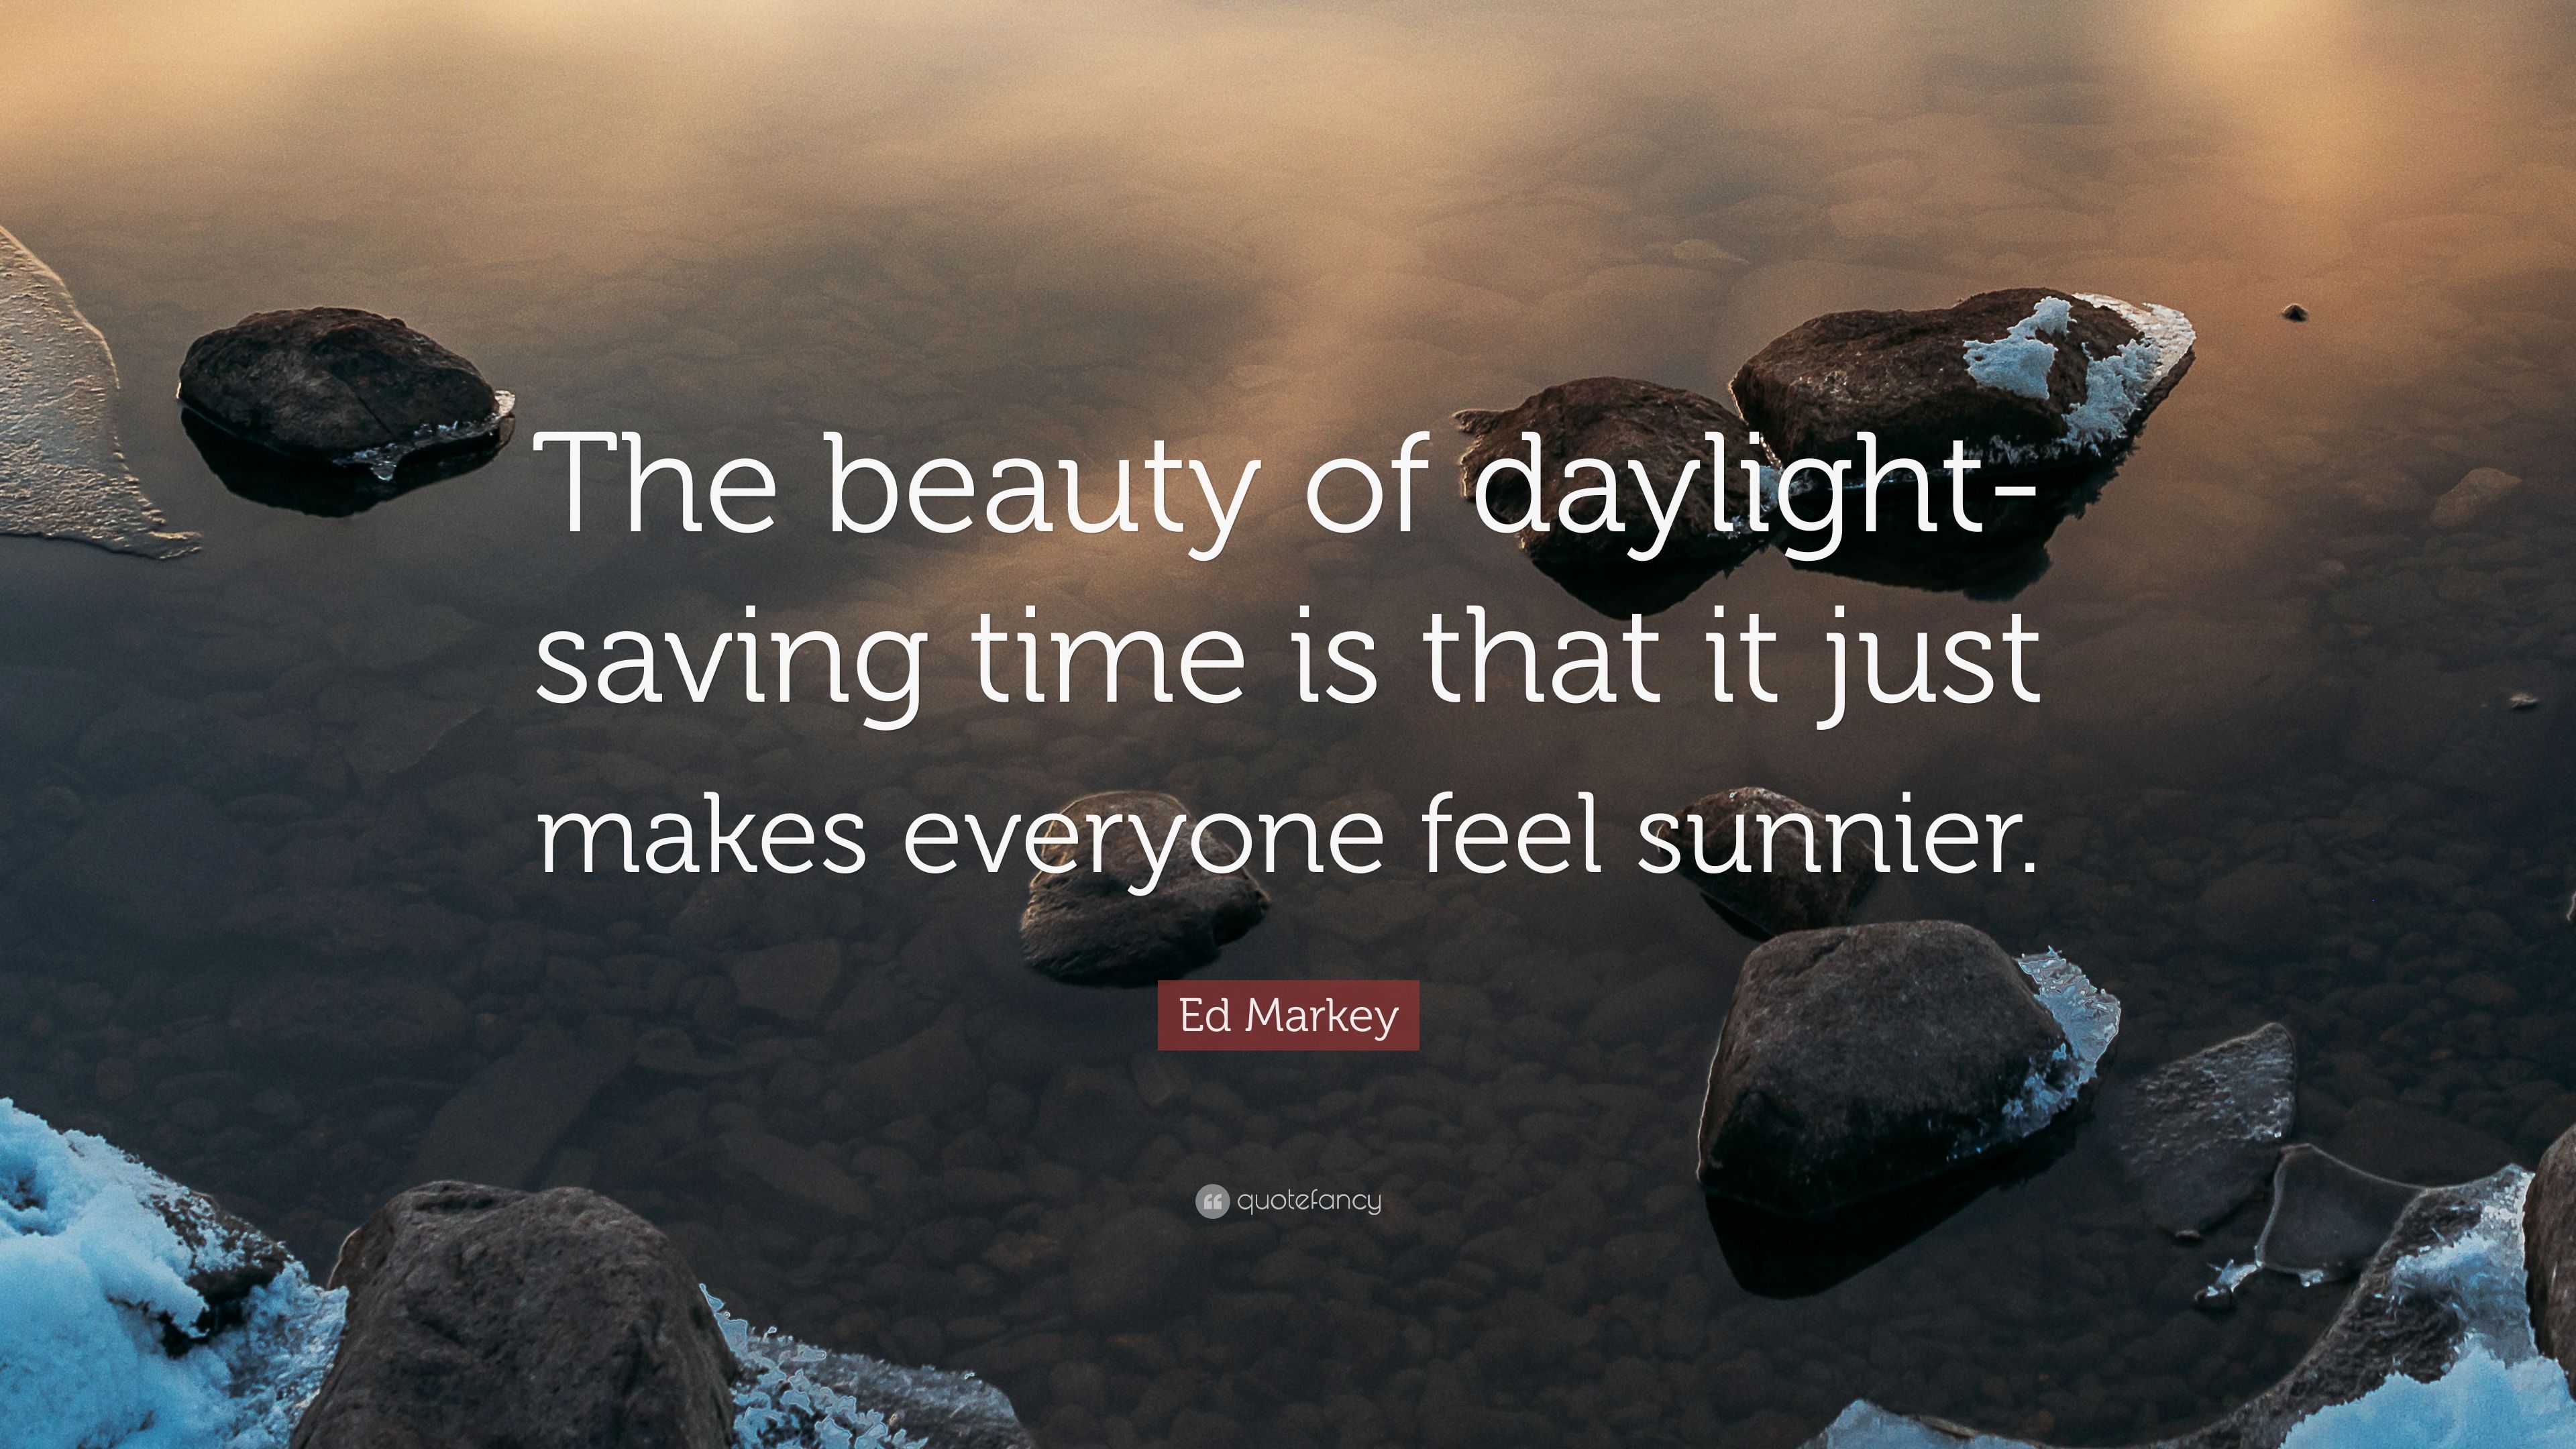 Ed Markey Quote: “The Beauty Of Daylight Saving Time Is That It